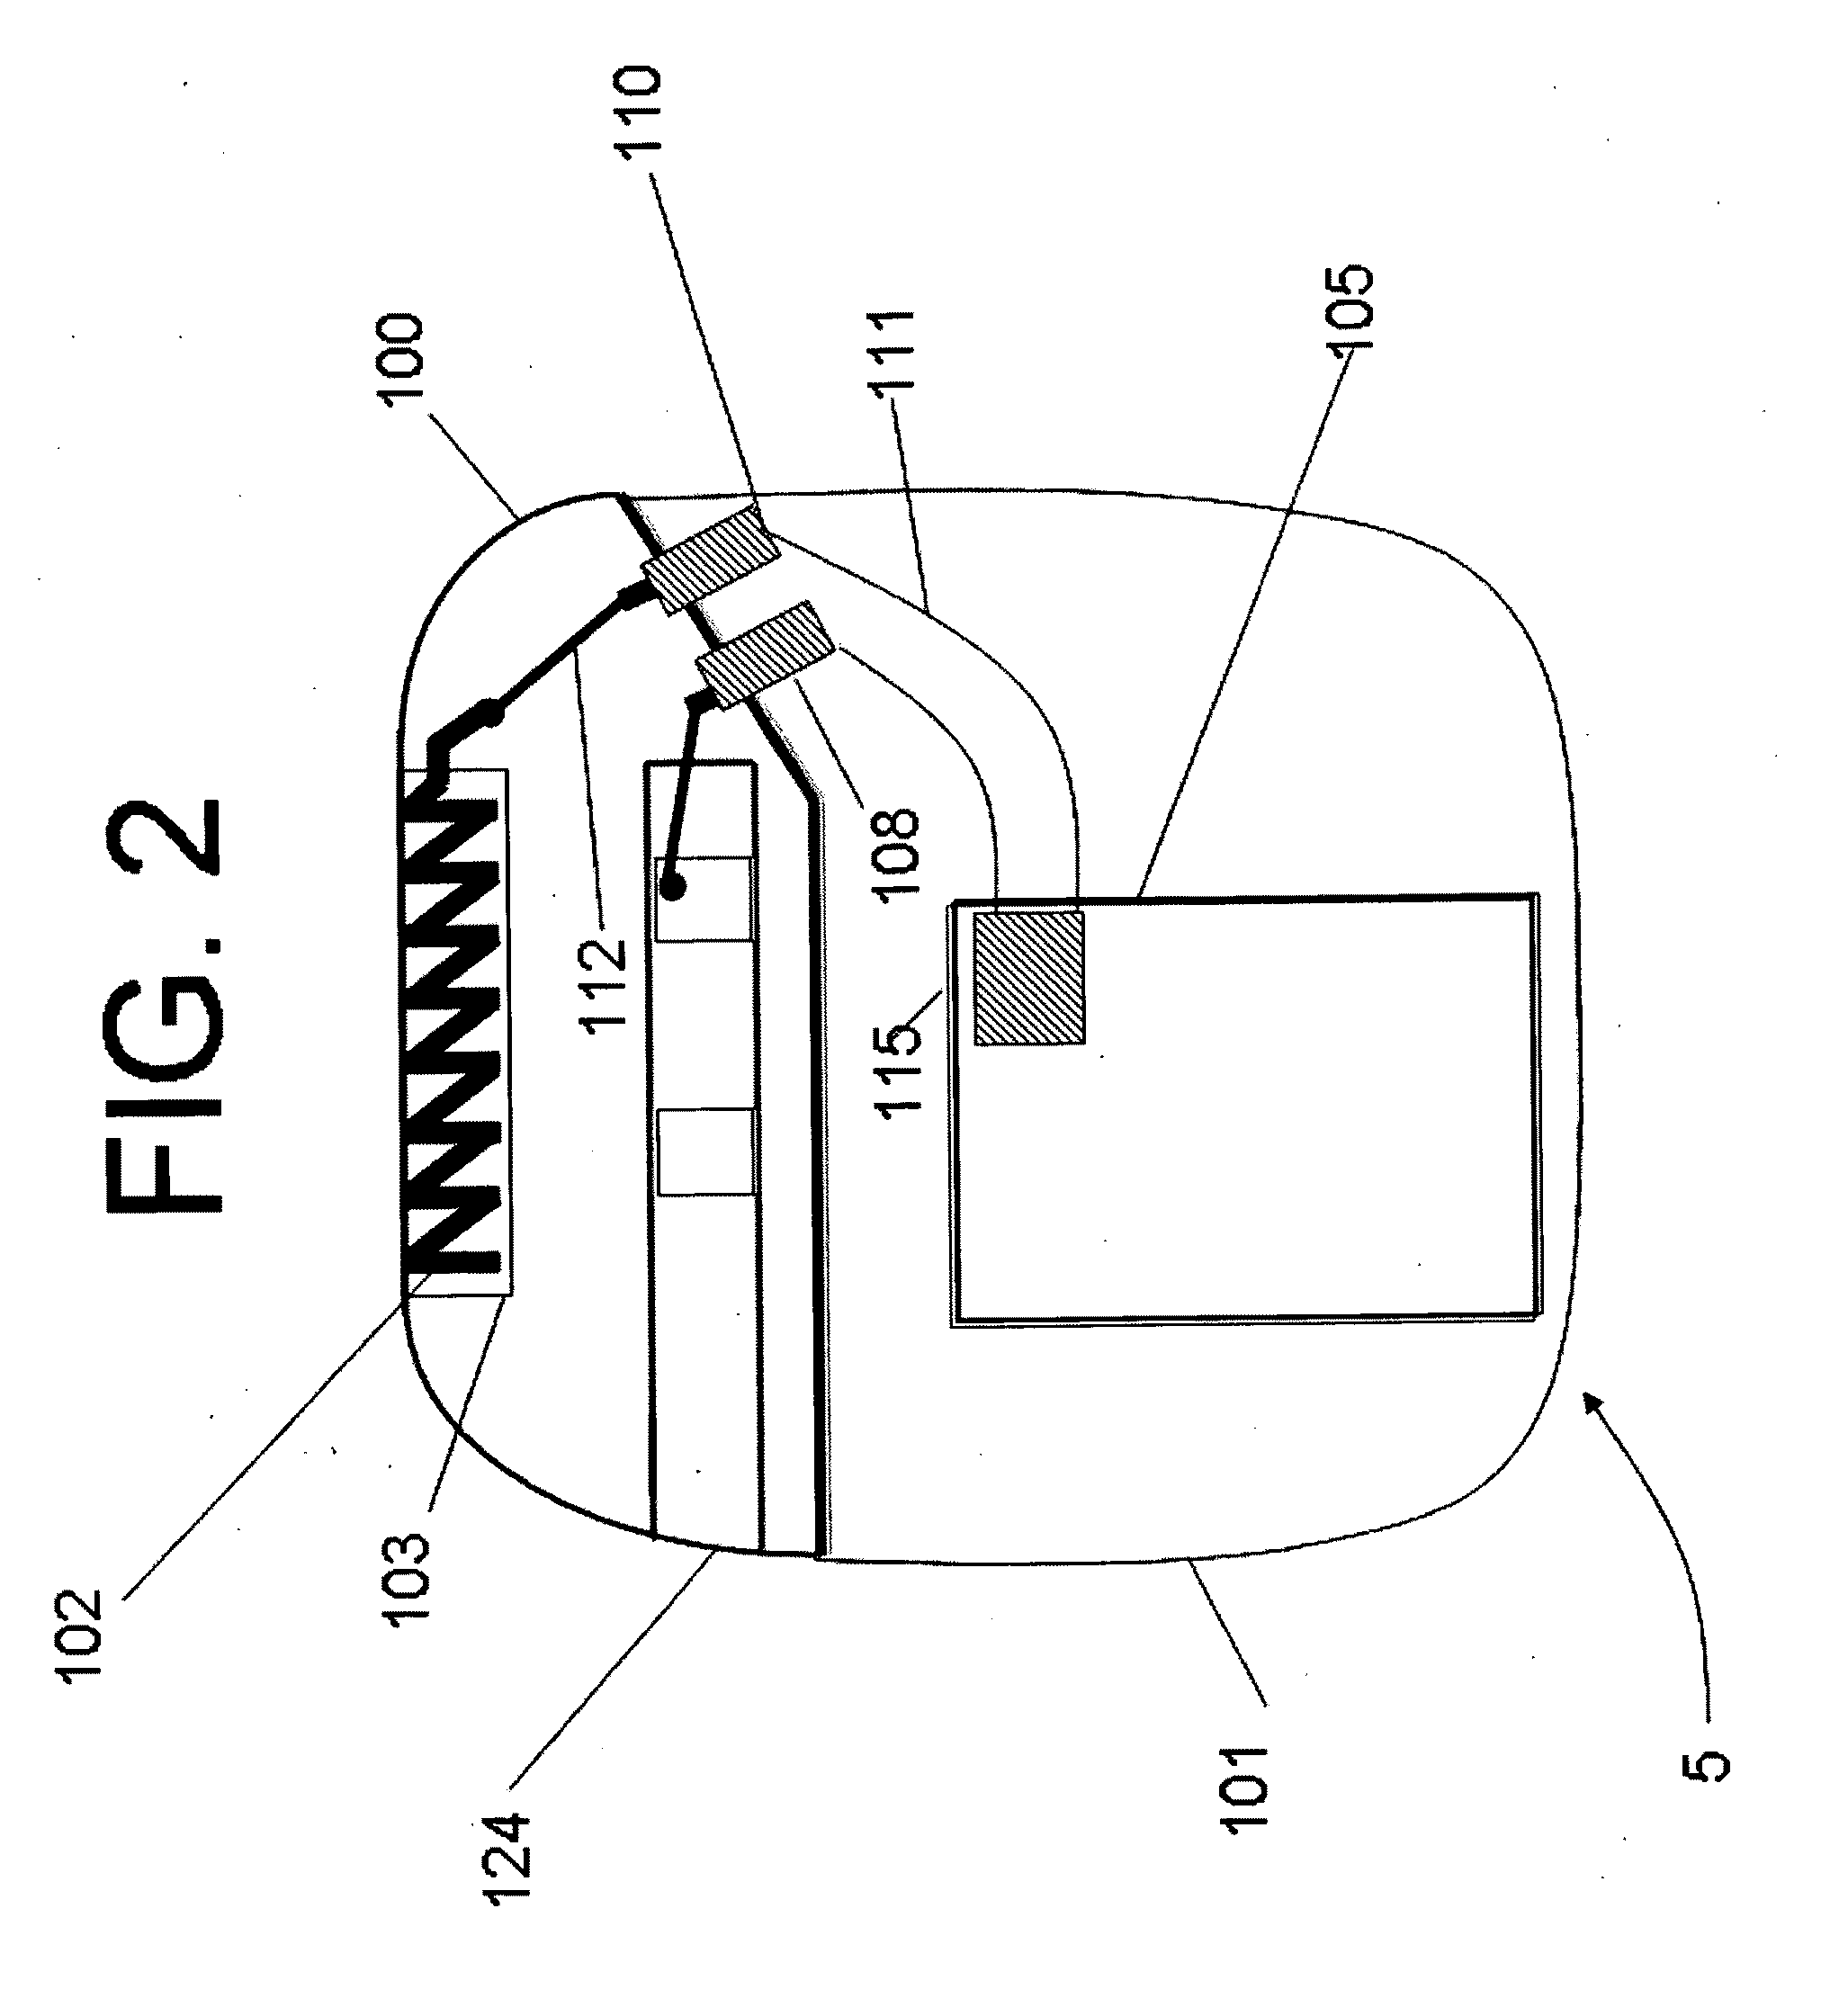 Header with integral antenna for implantable medical devices